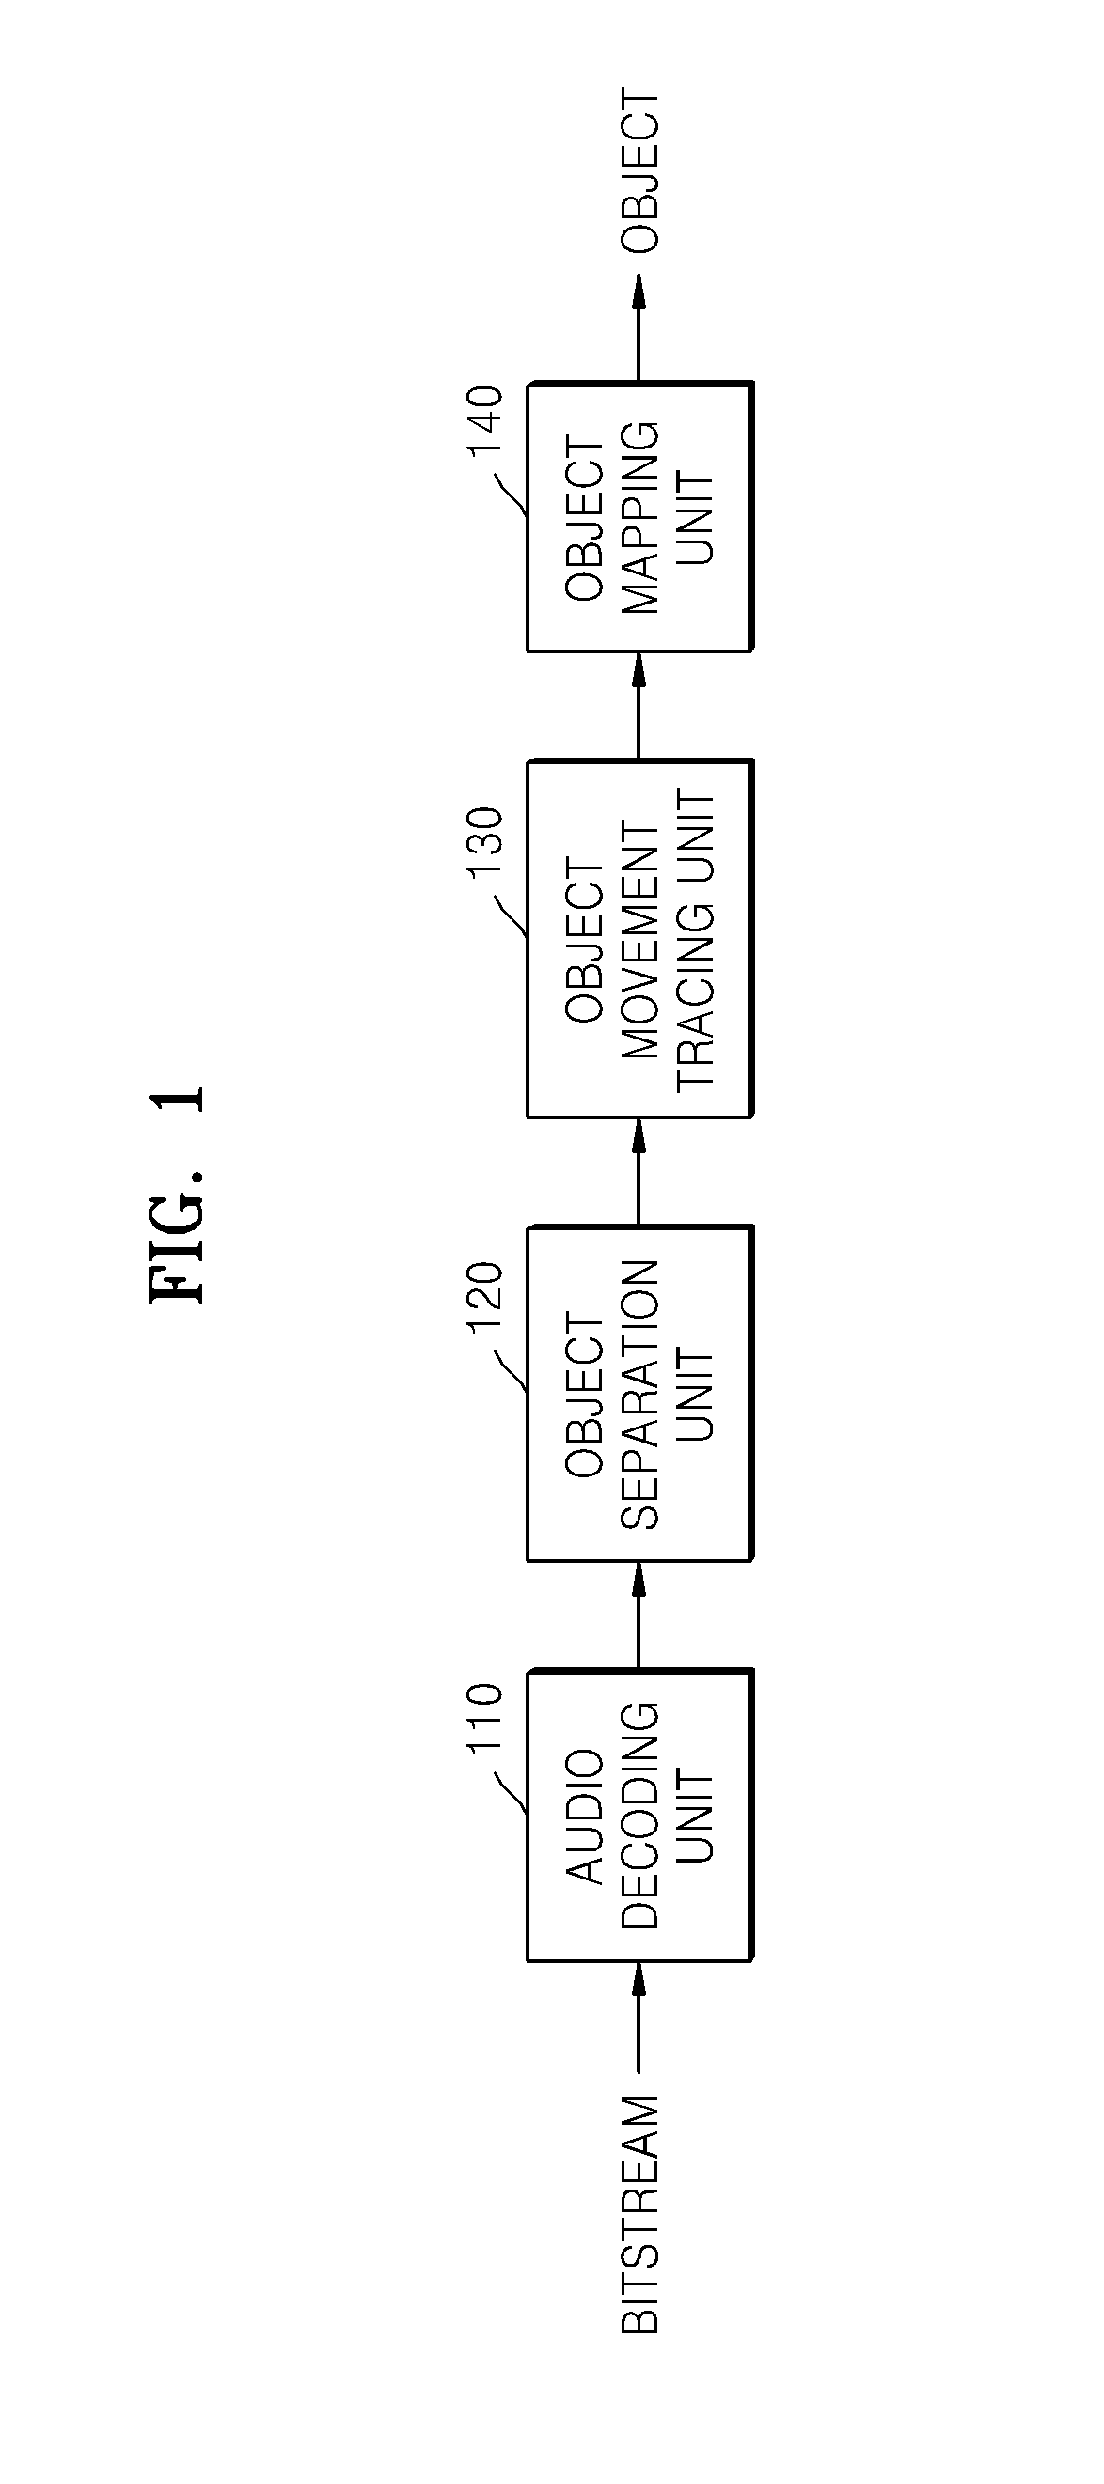 Method and apparatus for separating audio object